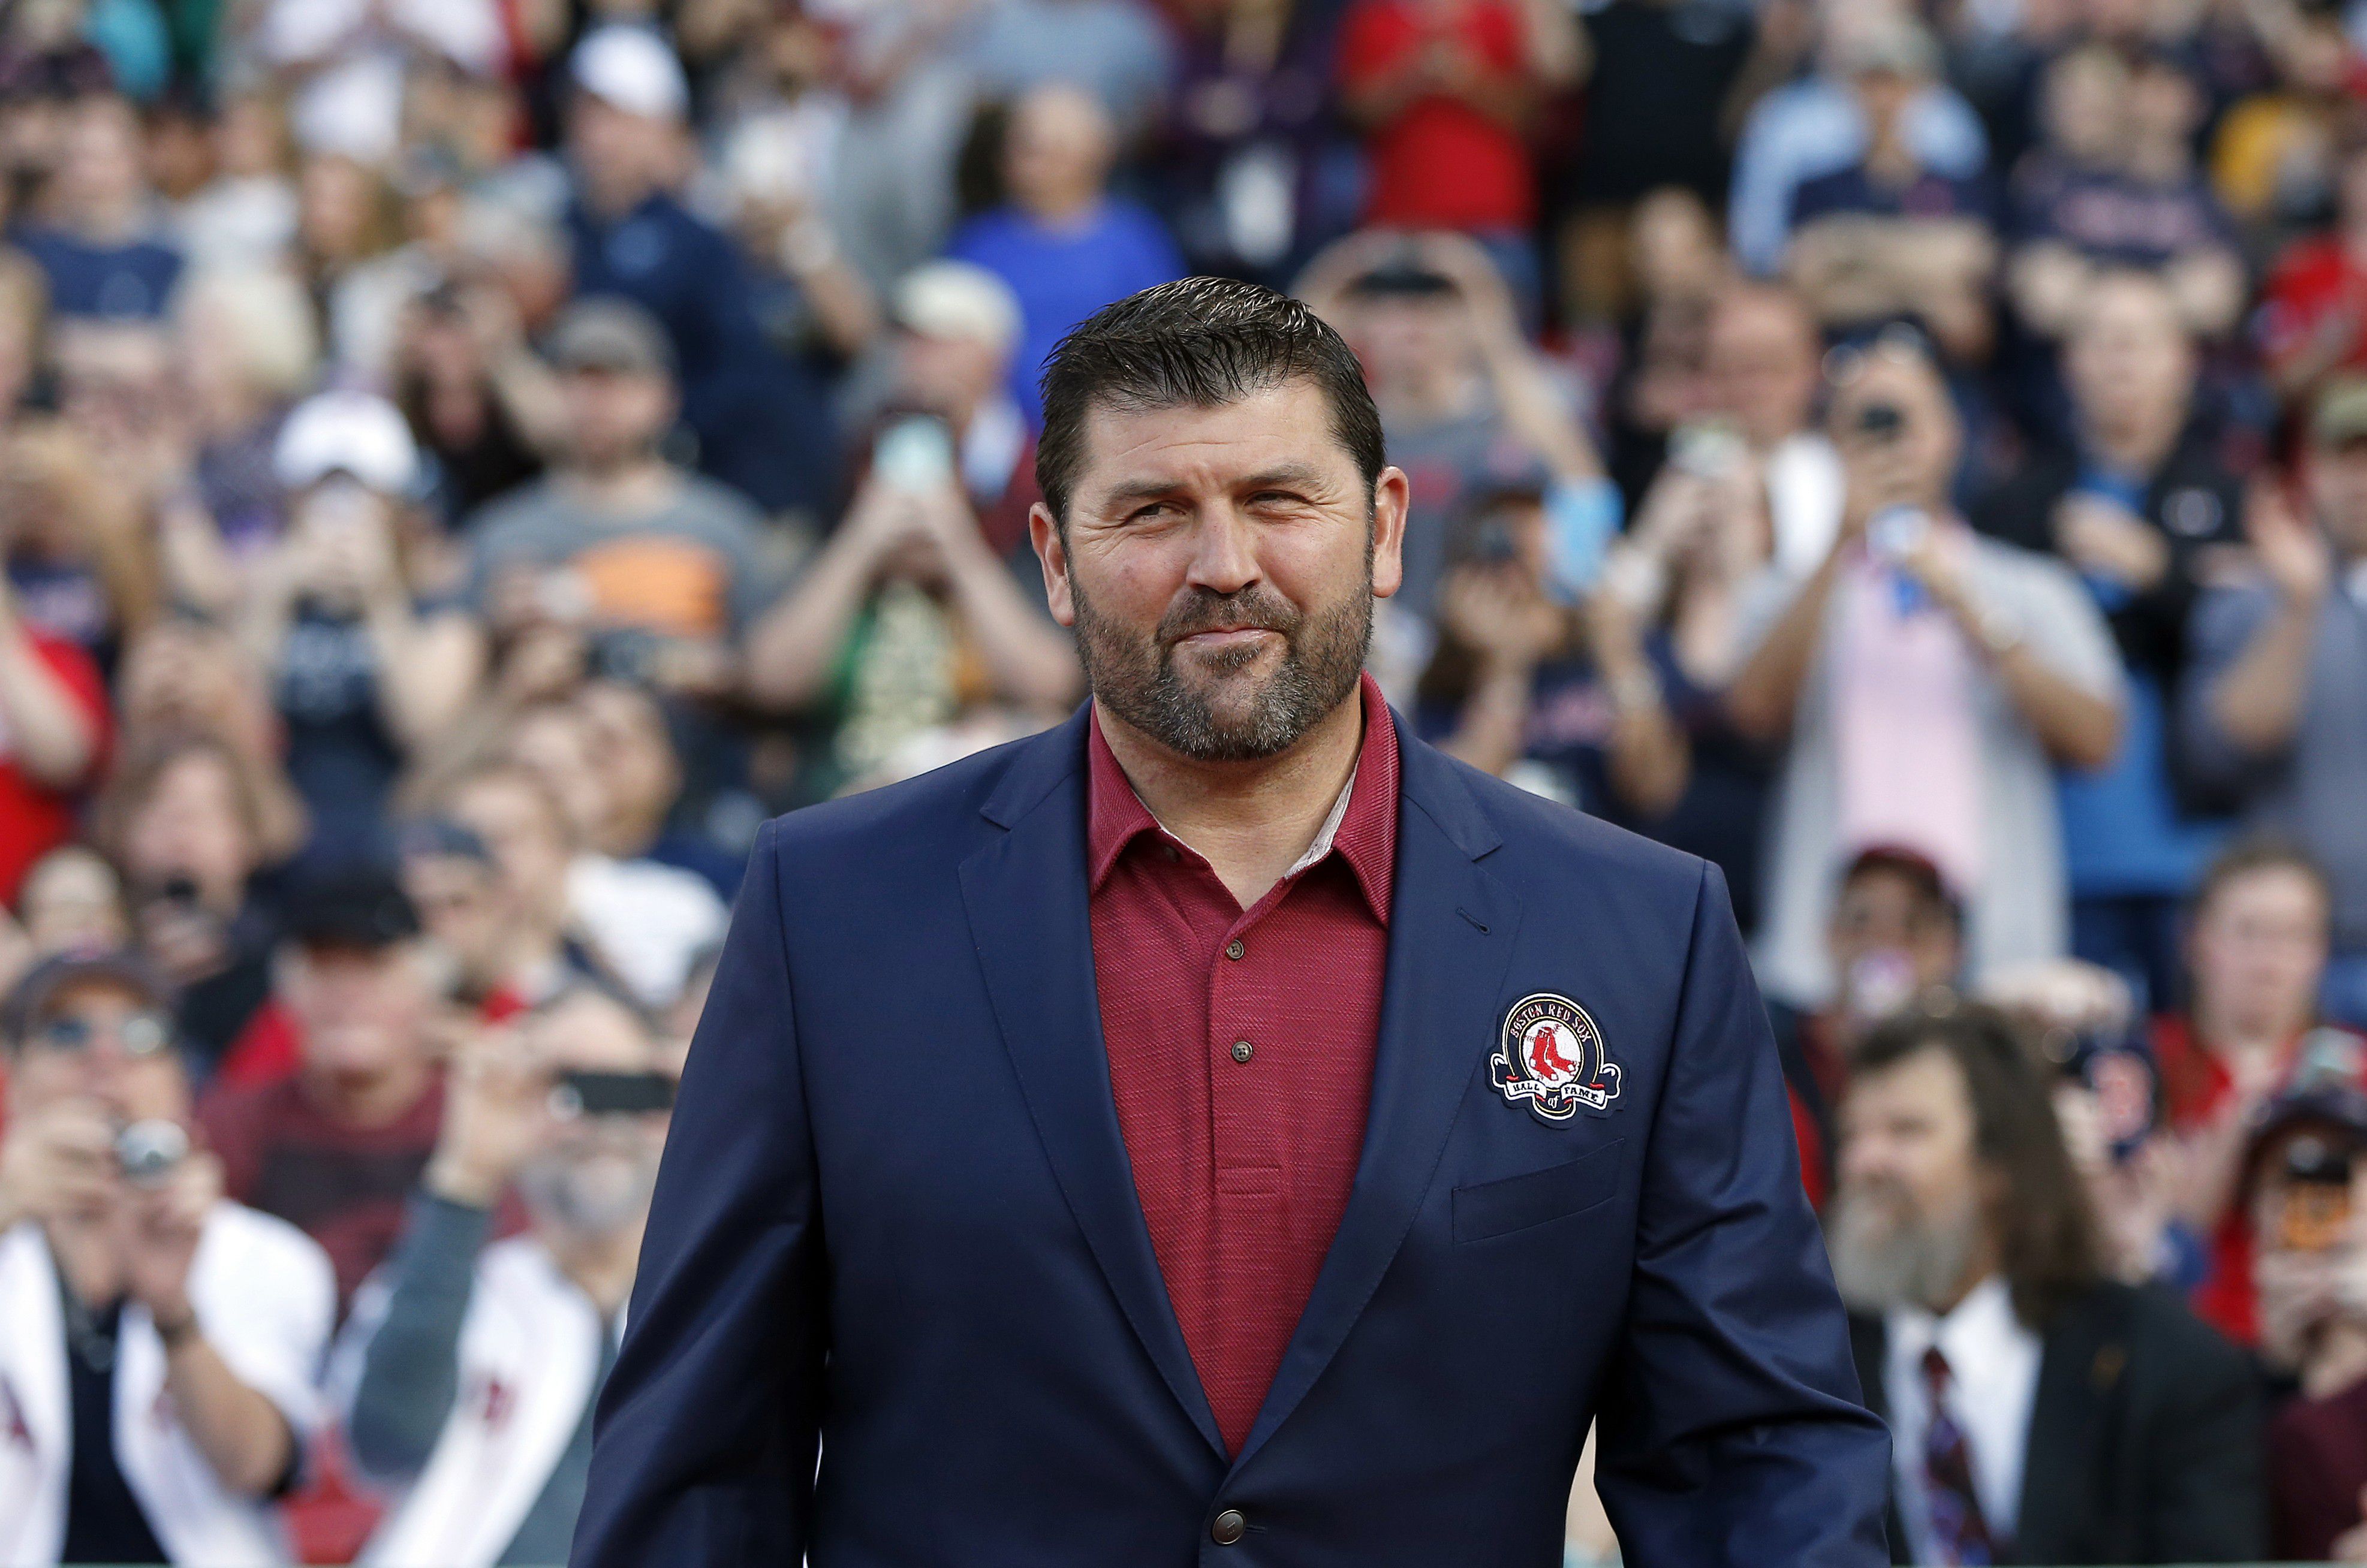 Jason Varitek a candidate to be the Mariners' next manager - Over